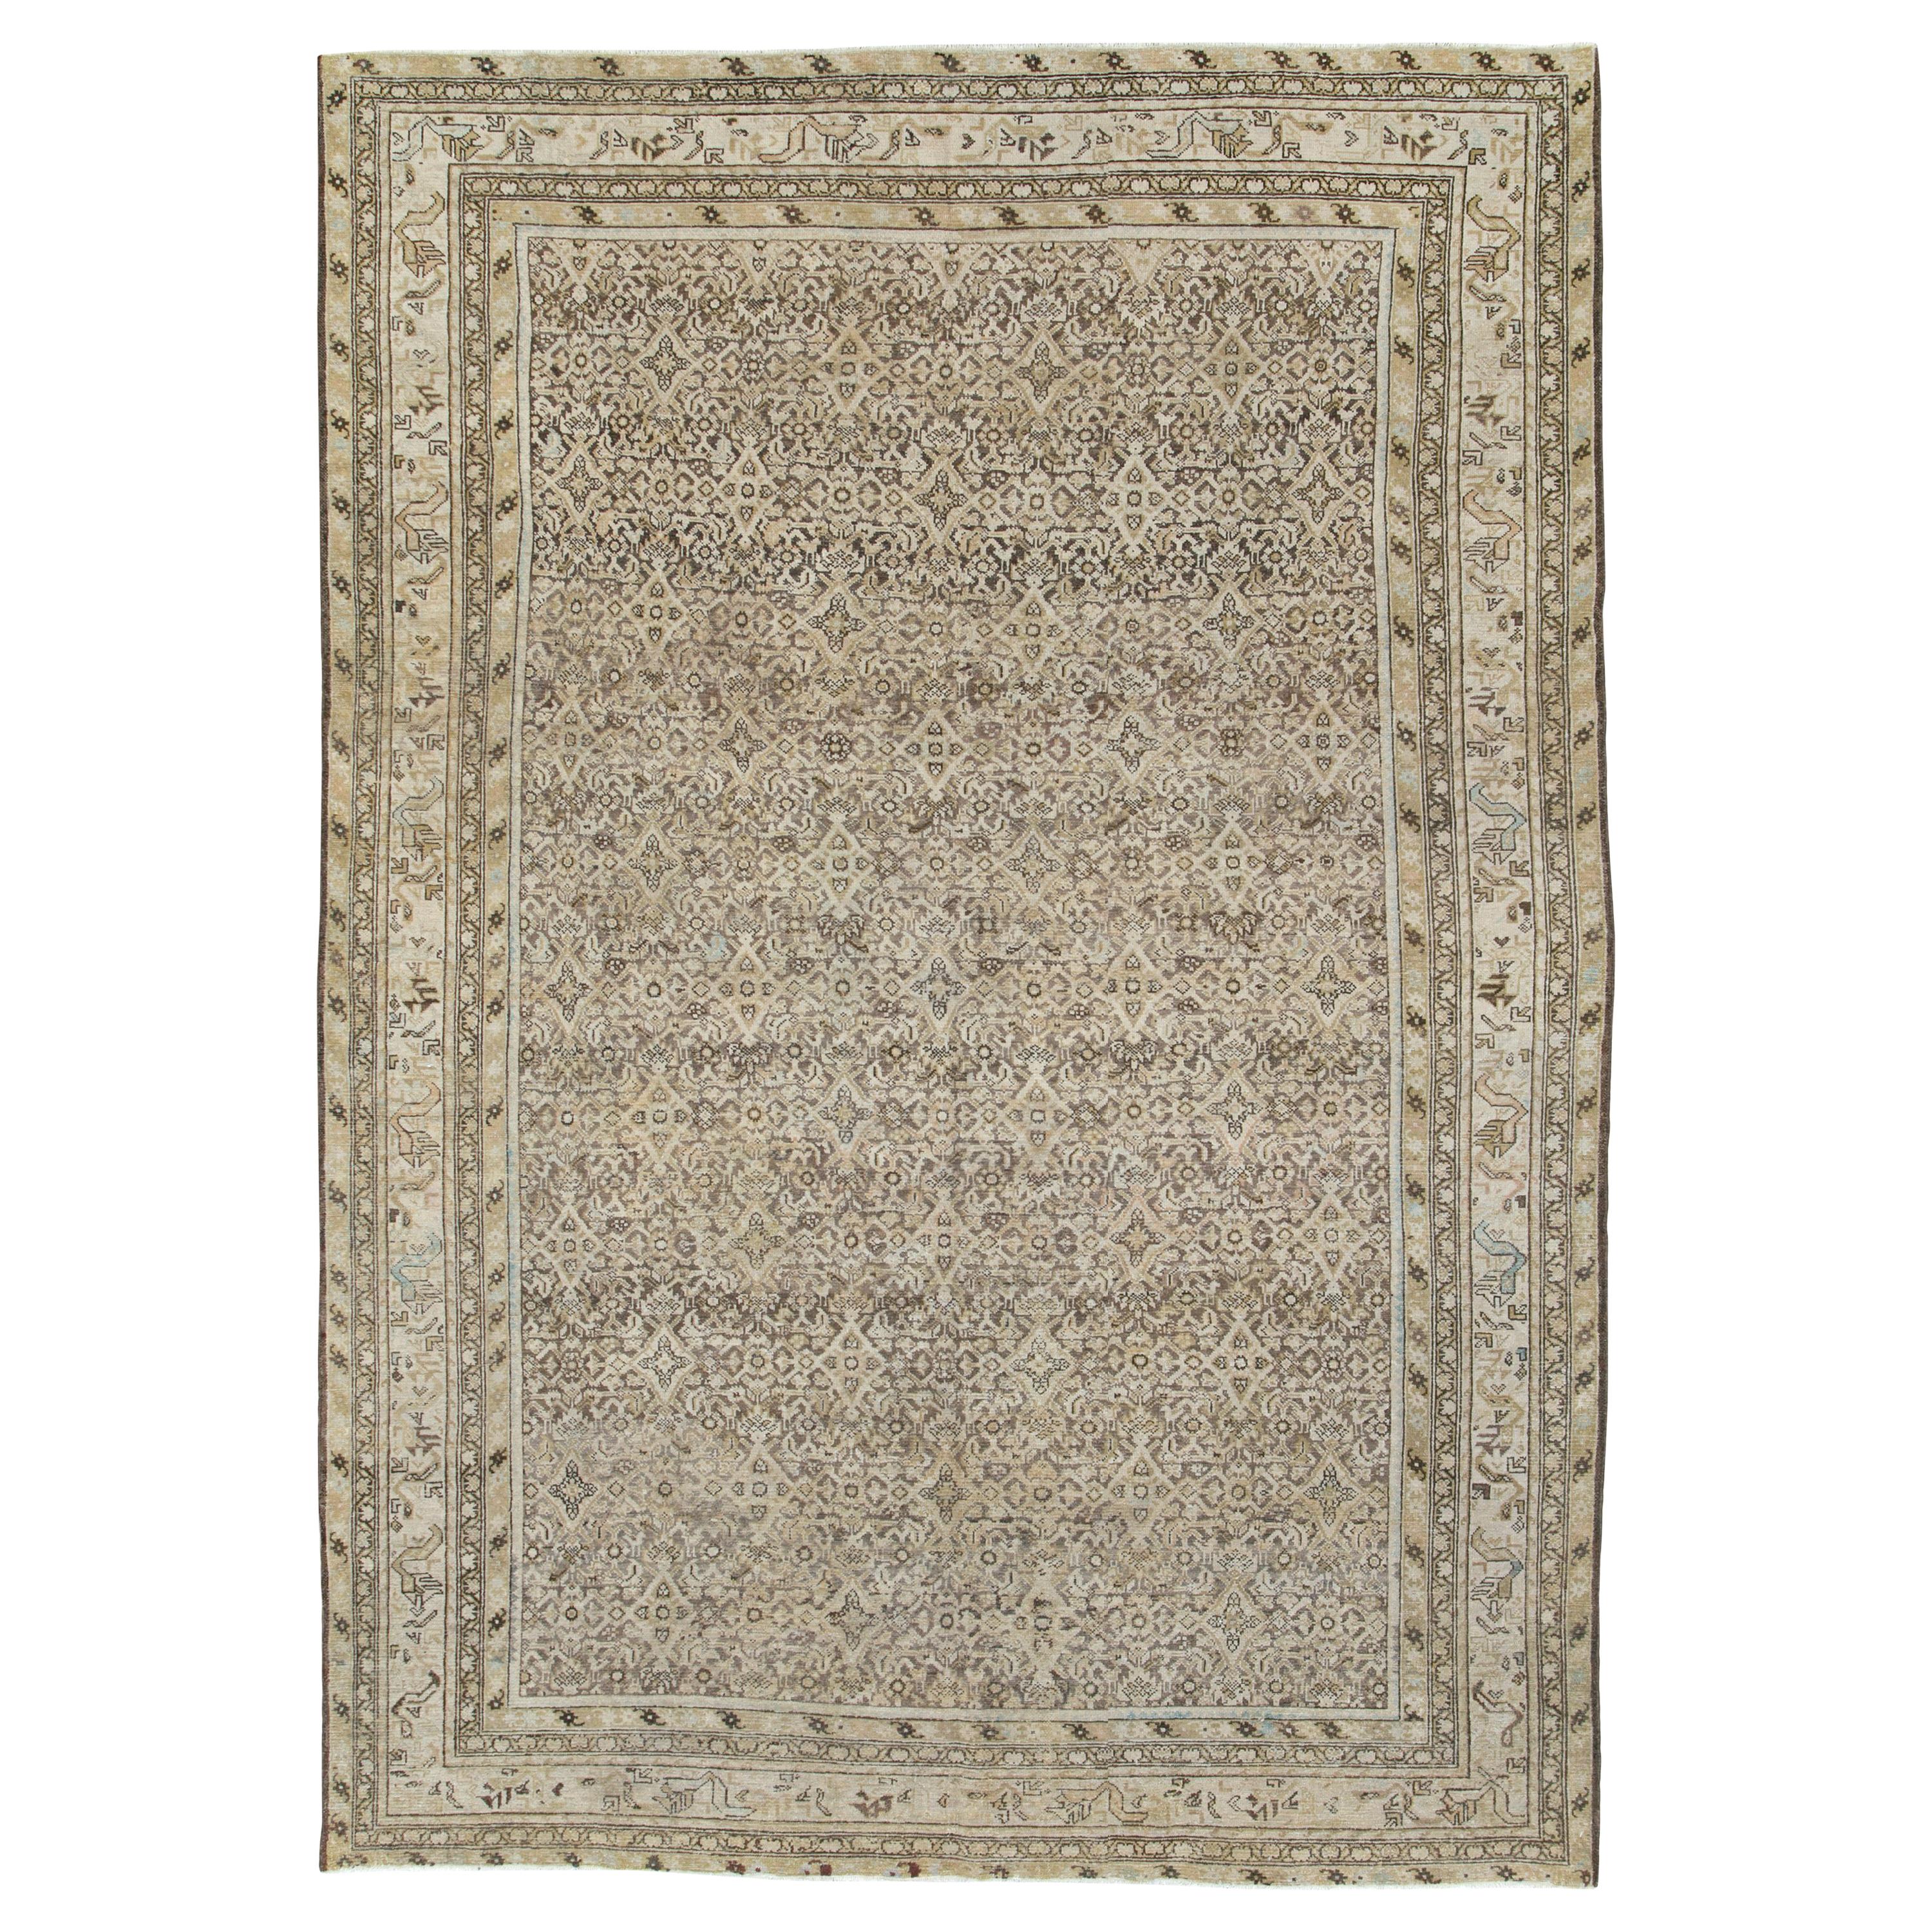 Antique Persian Malayer Carpet For Sale at 1stDibs